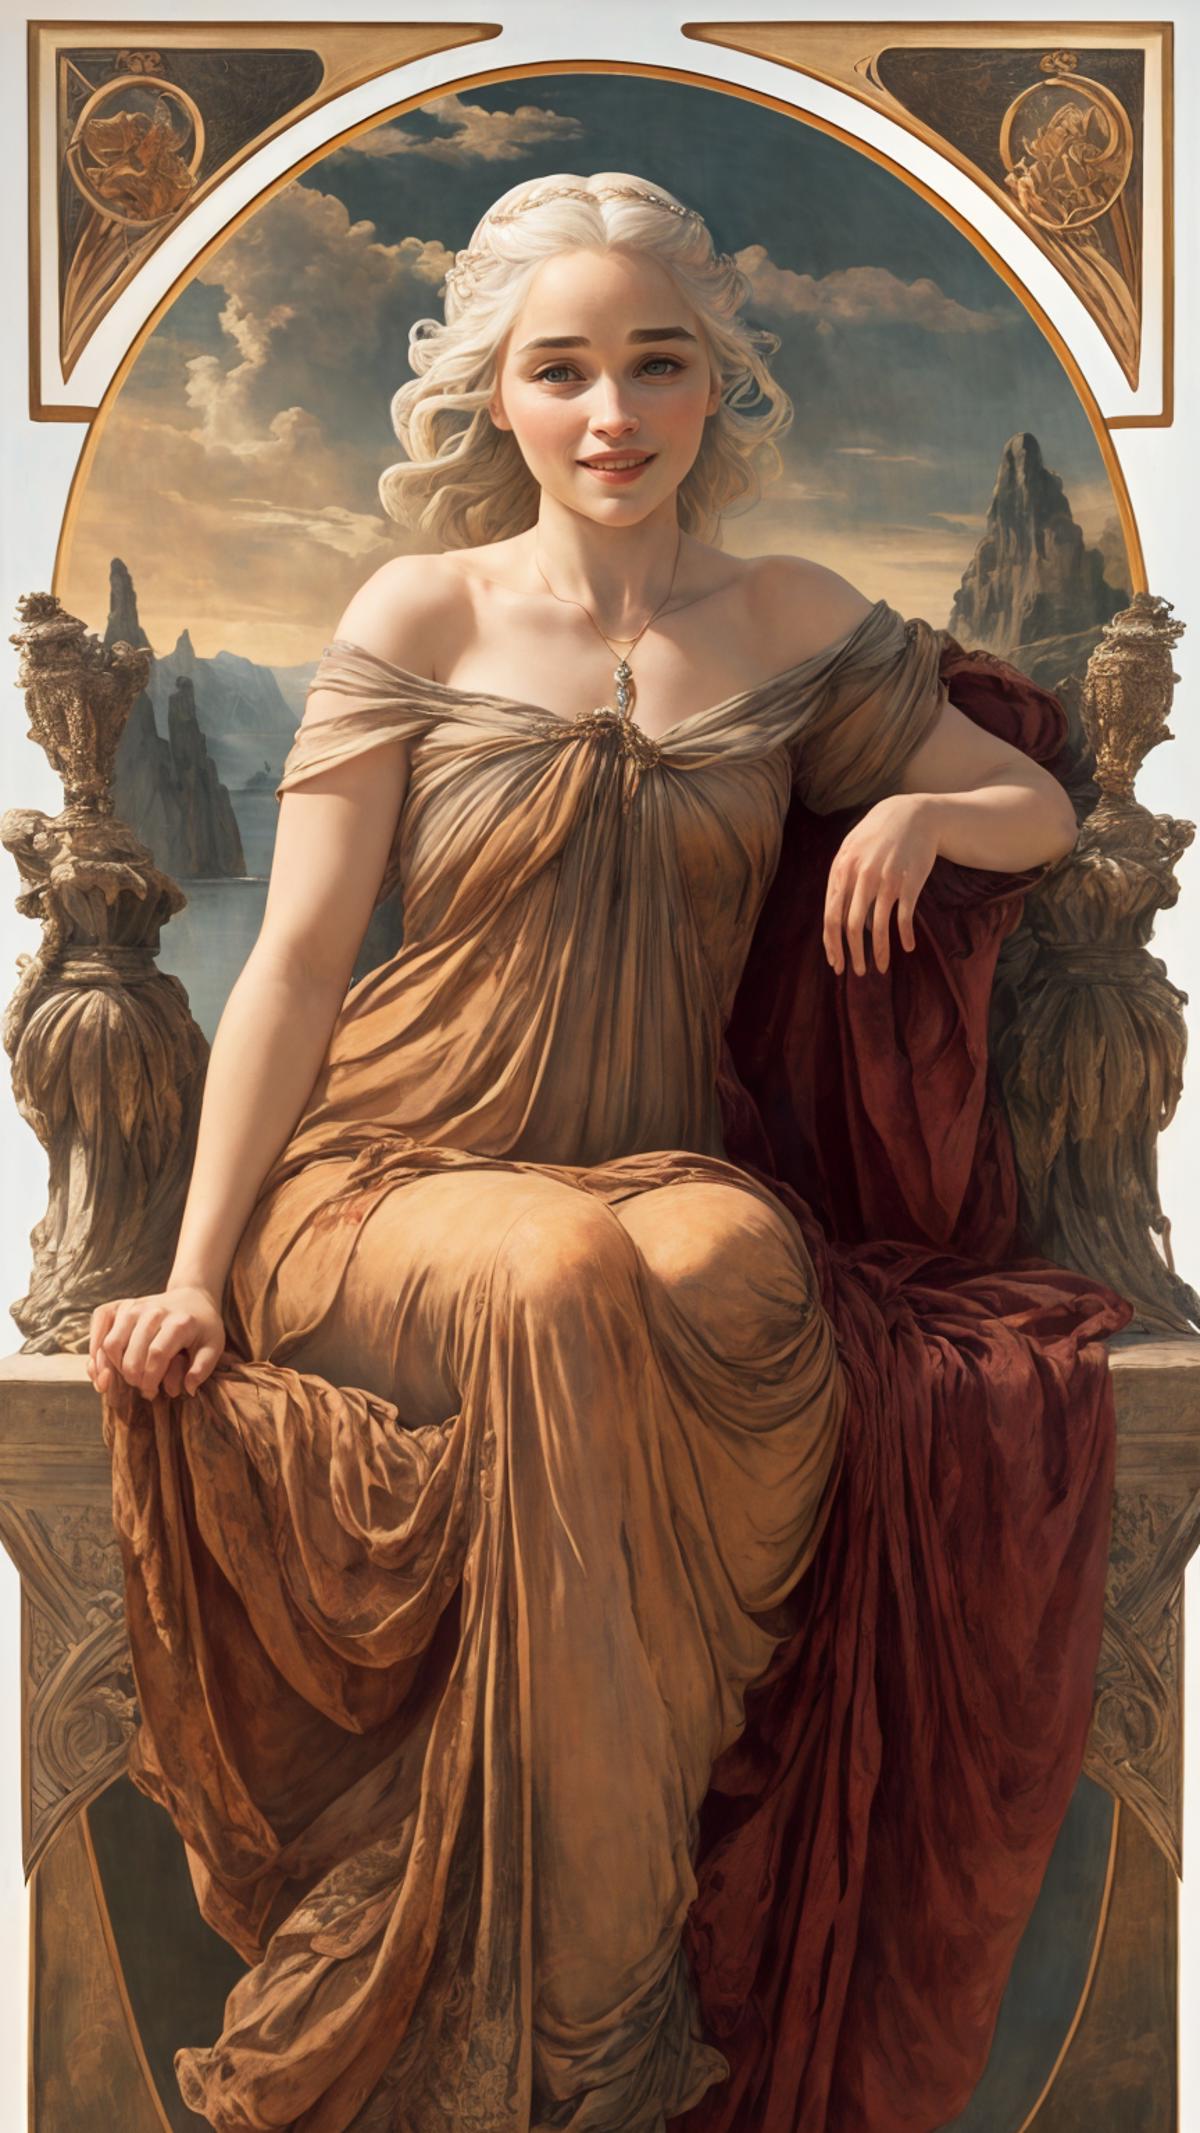 A statue depicting a woman with long hair and a necklace, sitting on a chair.